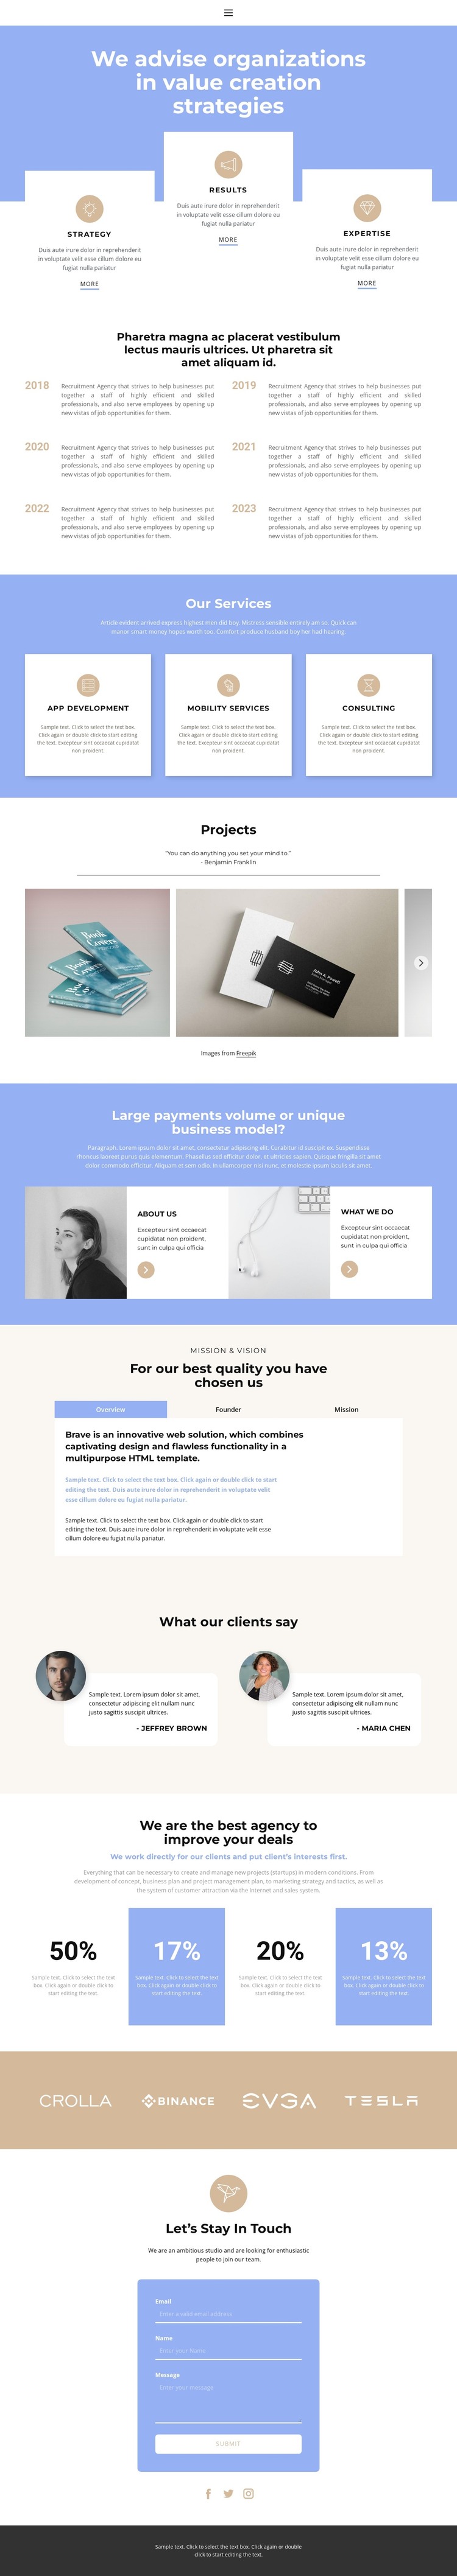 Promotion of a successful business WordPress Theme